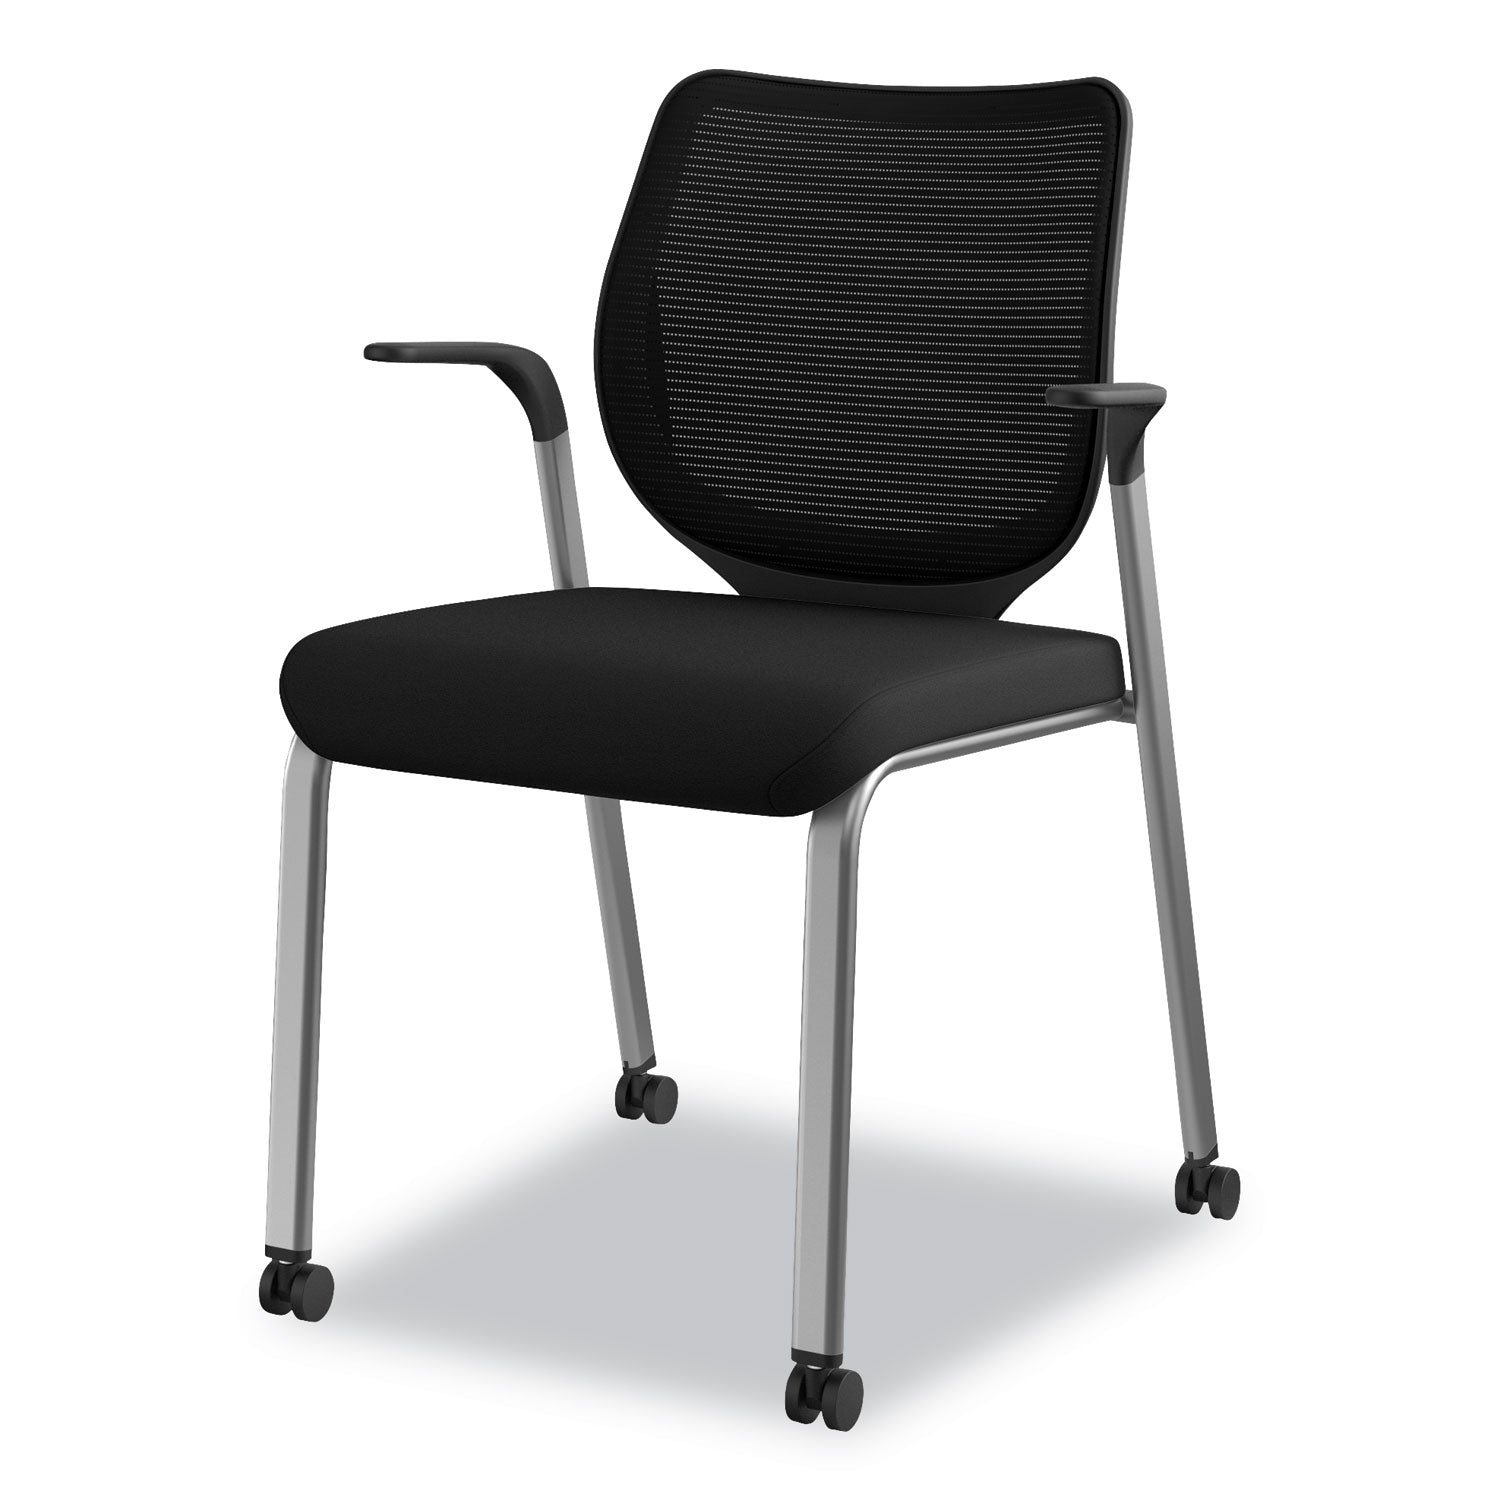 nucleus-series-multipurpose-stacking-chair-with-ilira-stretch-m4-back-supports-up-to-300-lb-black-seat-back-platinum-base_honn606hcu10t1 - 3